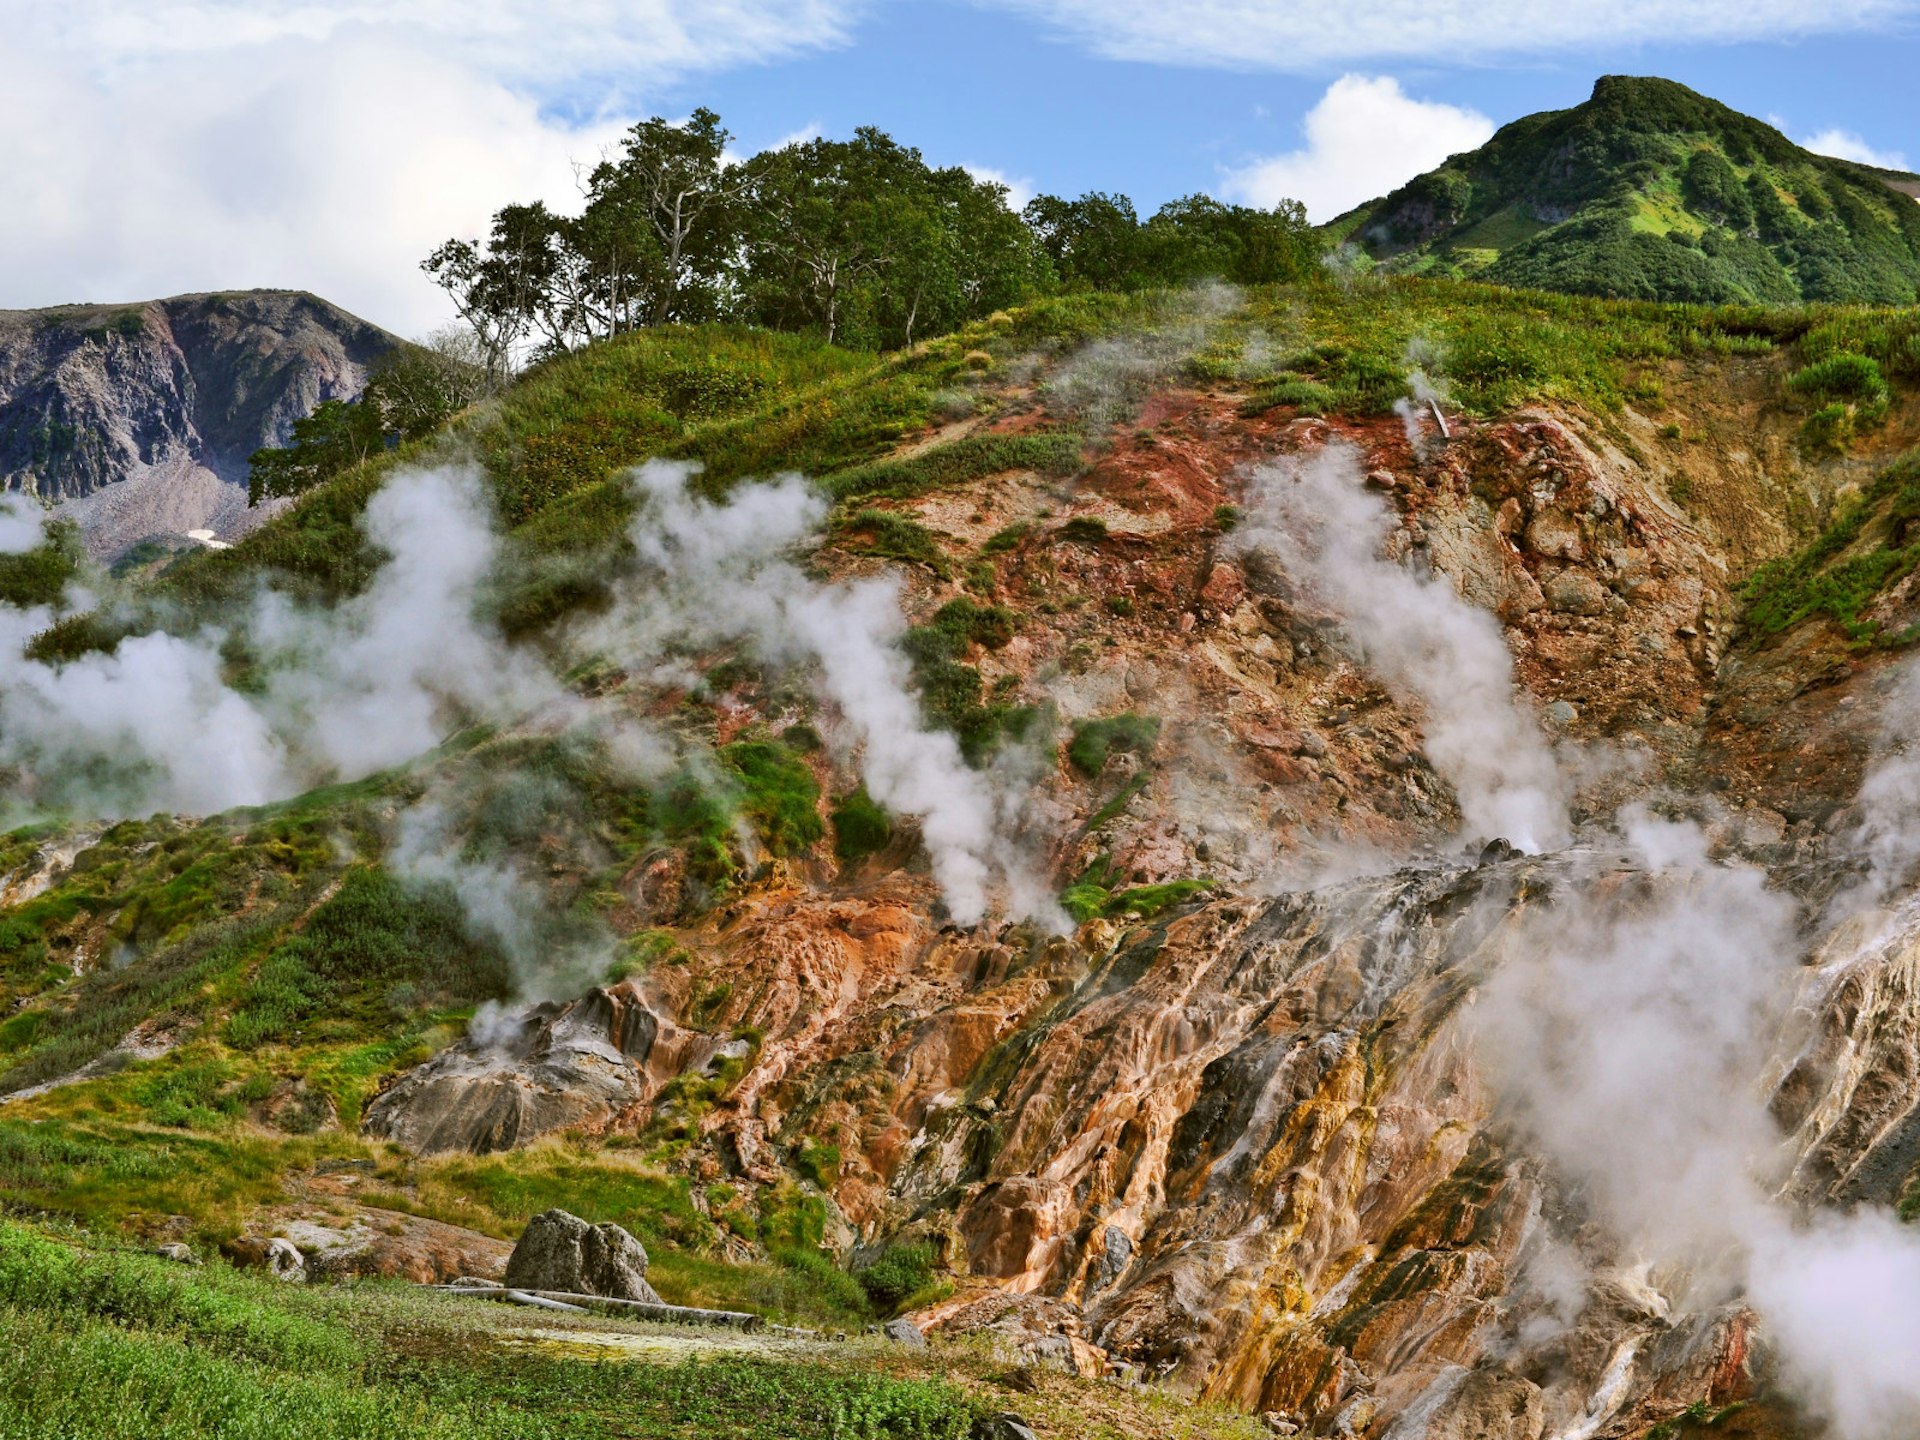 One of Kamchatka’s highlights, the steaming Valley of Geysers can be accessed only by helicopter © Alla / Shutterstock